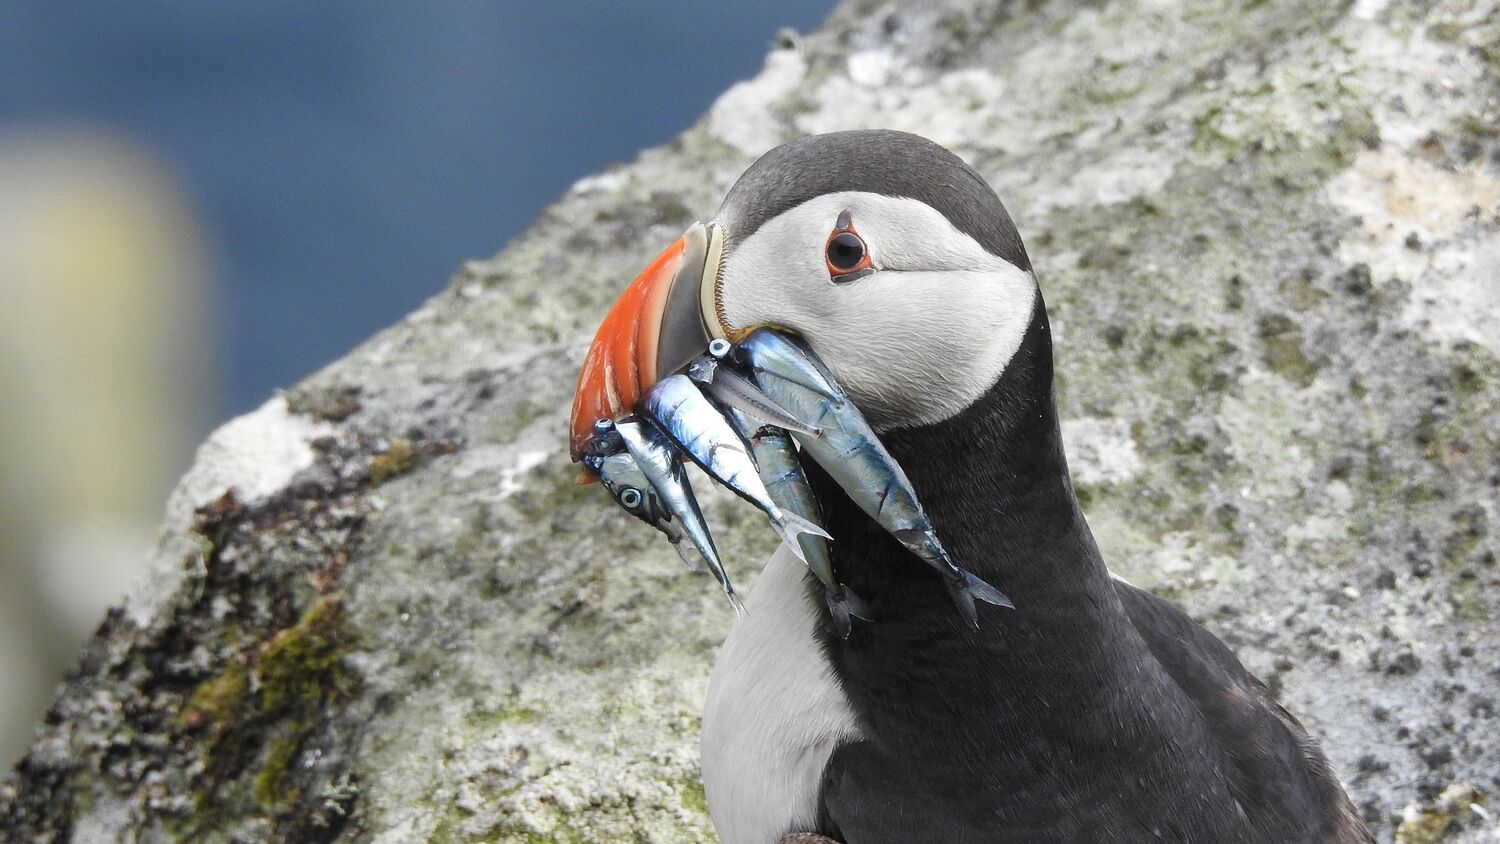 A puffin sits on a lichen-covered rock, with several fish hanging out of its beak.